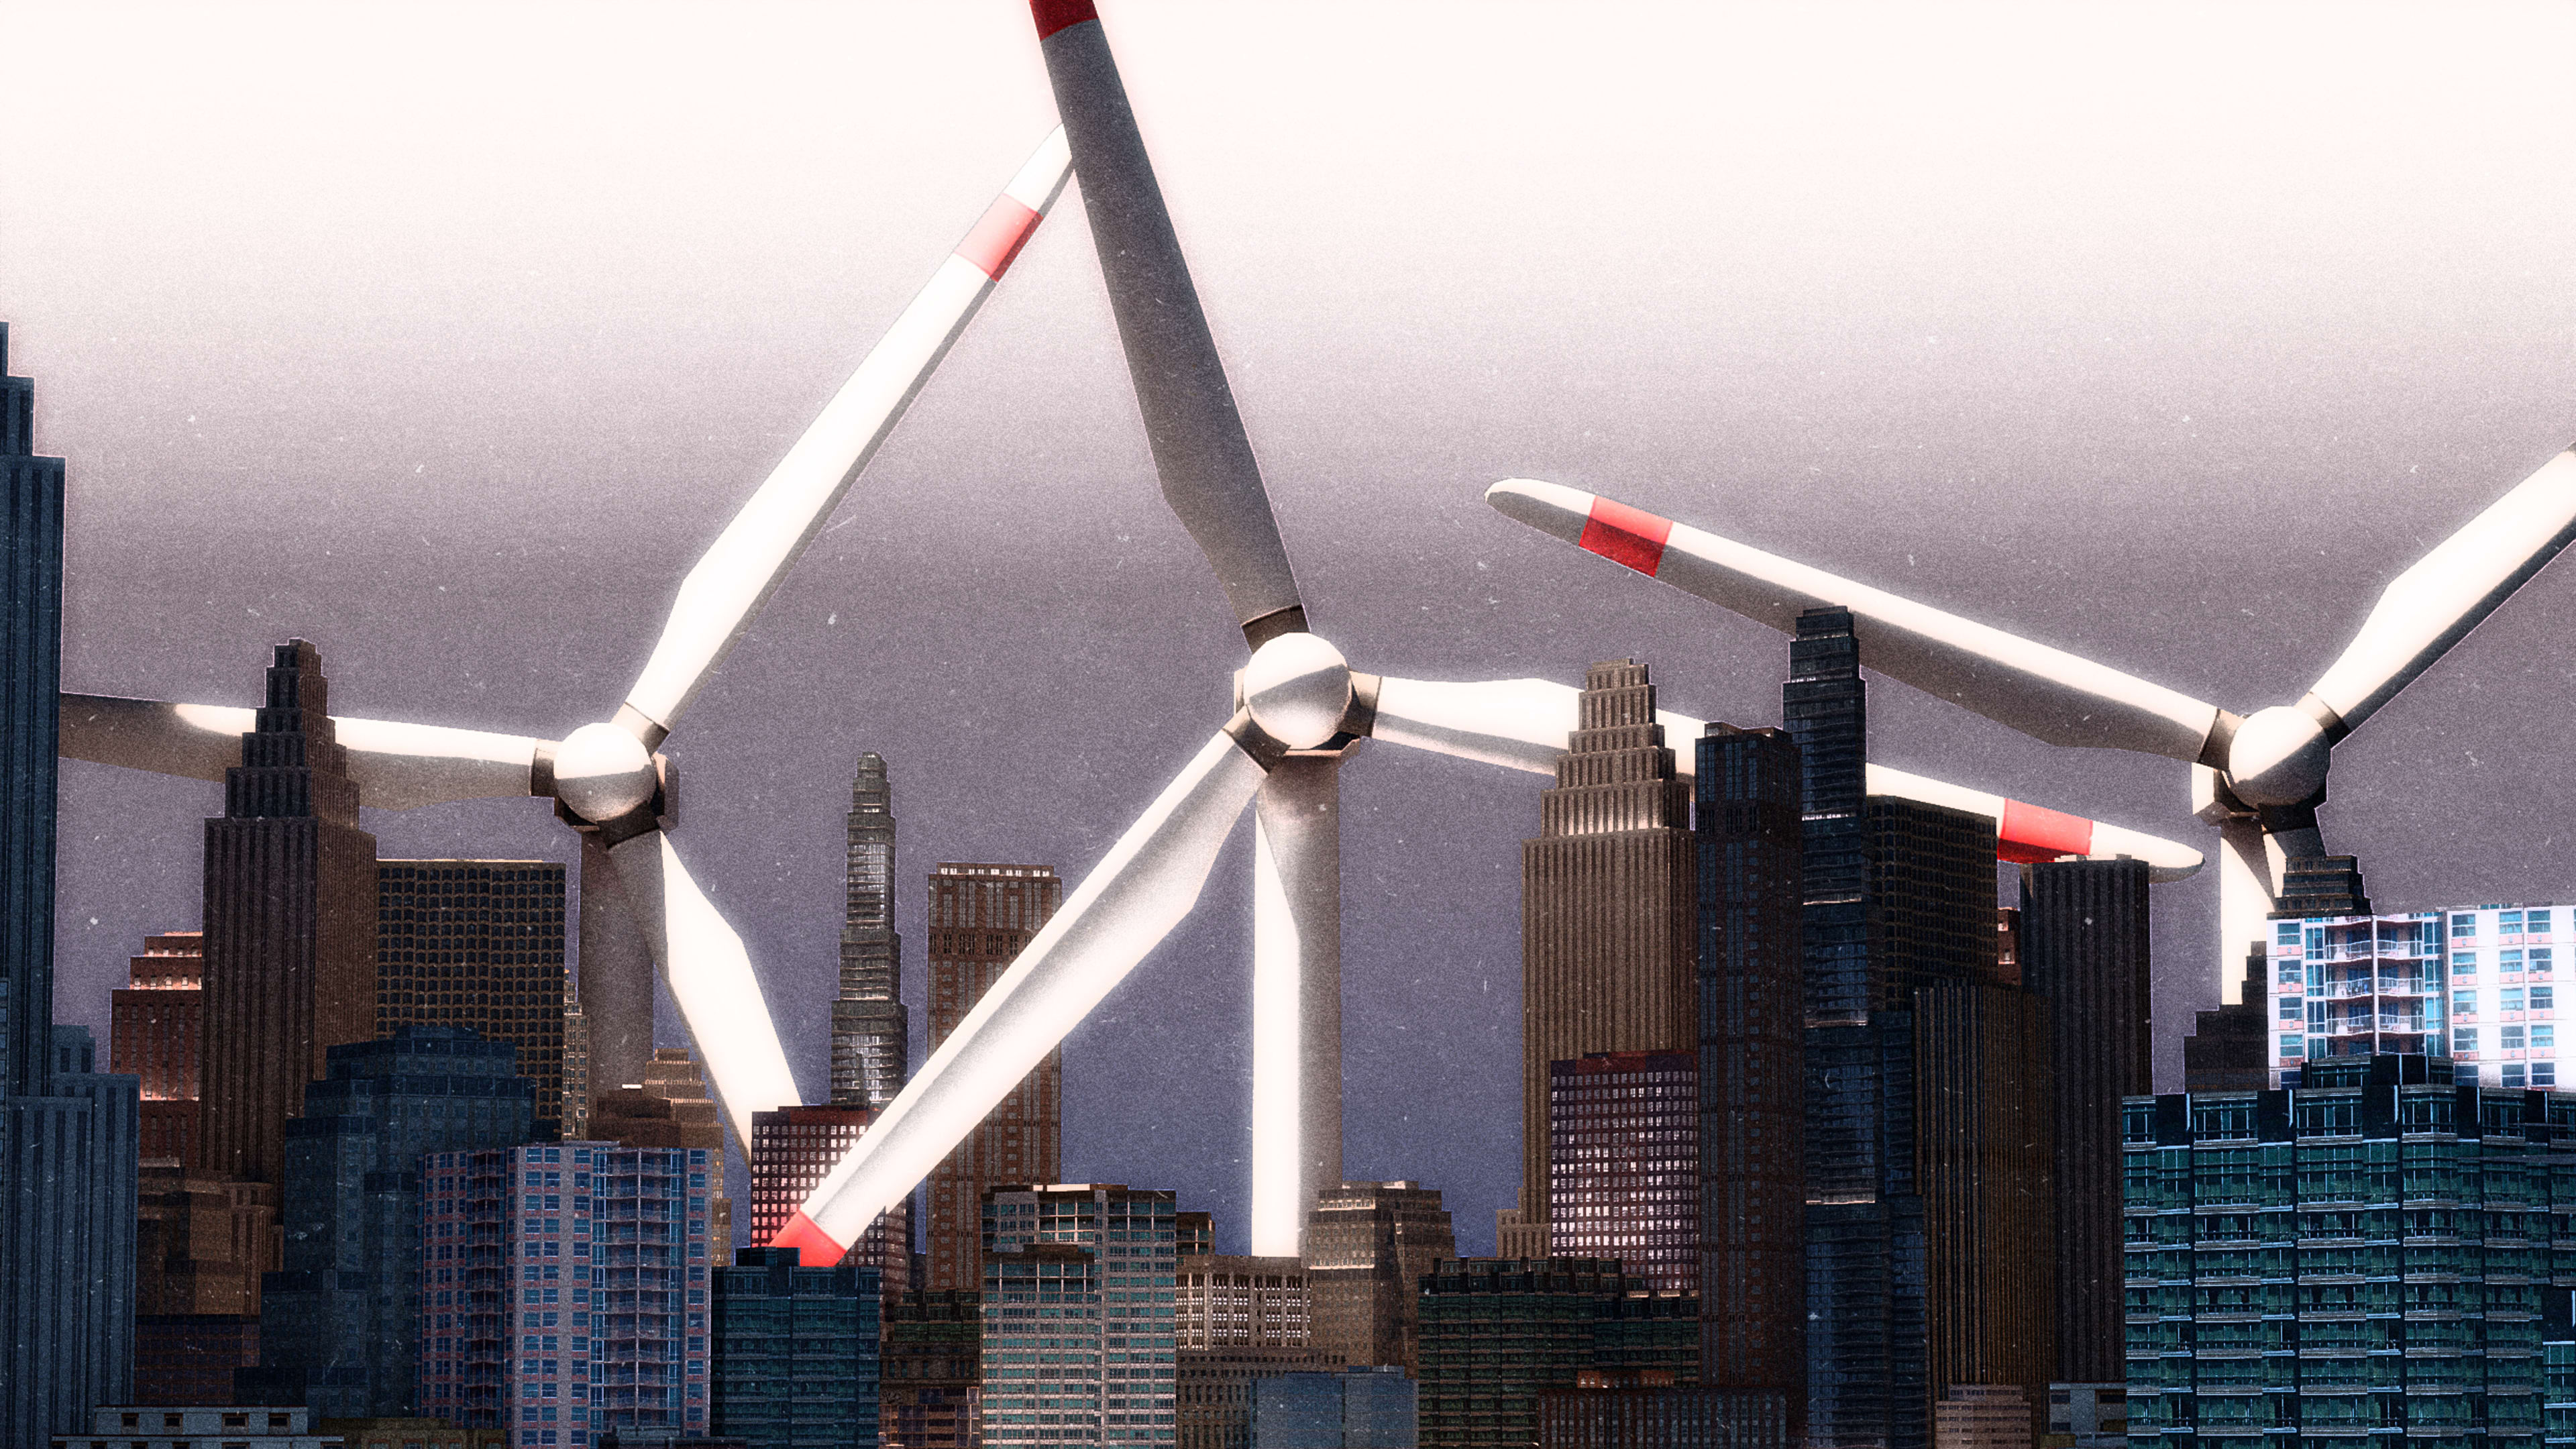 Wind turbines are already the size of skyscrapers. How much bigger can they get?